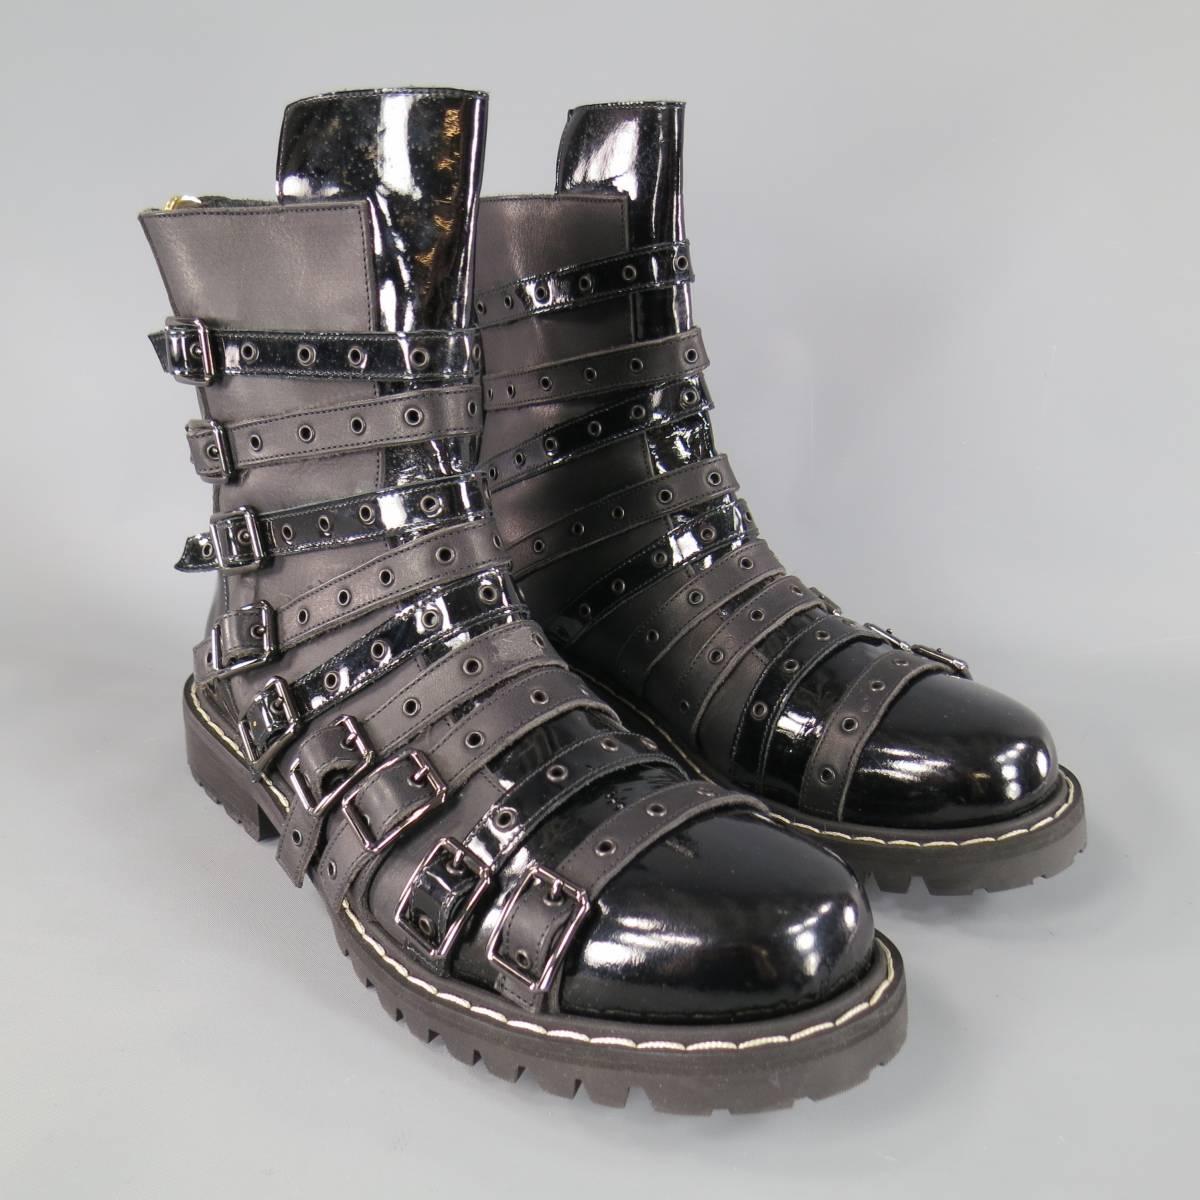 Rare GARETH PUGH goth boots in a smooth mate black leather with a patent leather toe and frontal panel, thick commando sole, back zip closure, and multi belted straps throughout. Made in Italy.
 
Good Pre-Owned Condition.
Marked: IT 43
